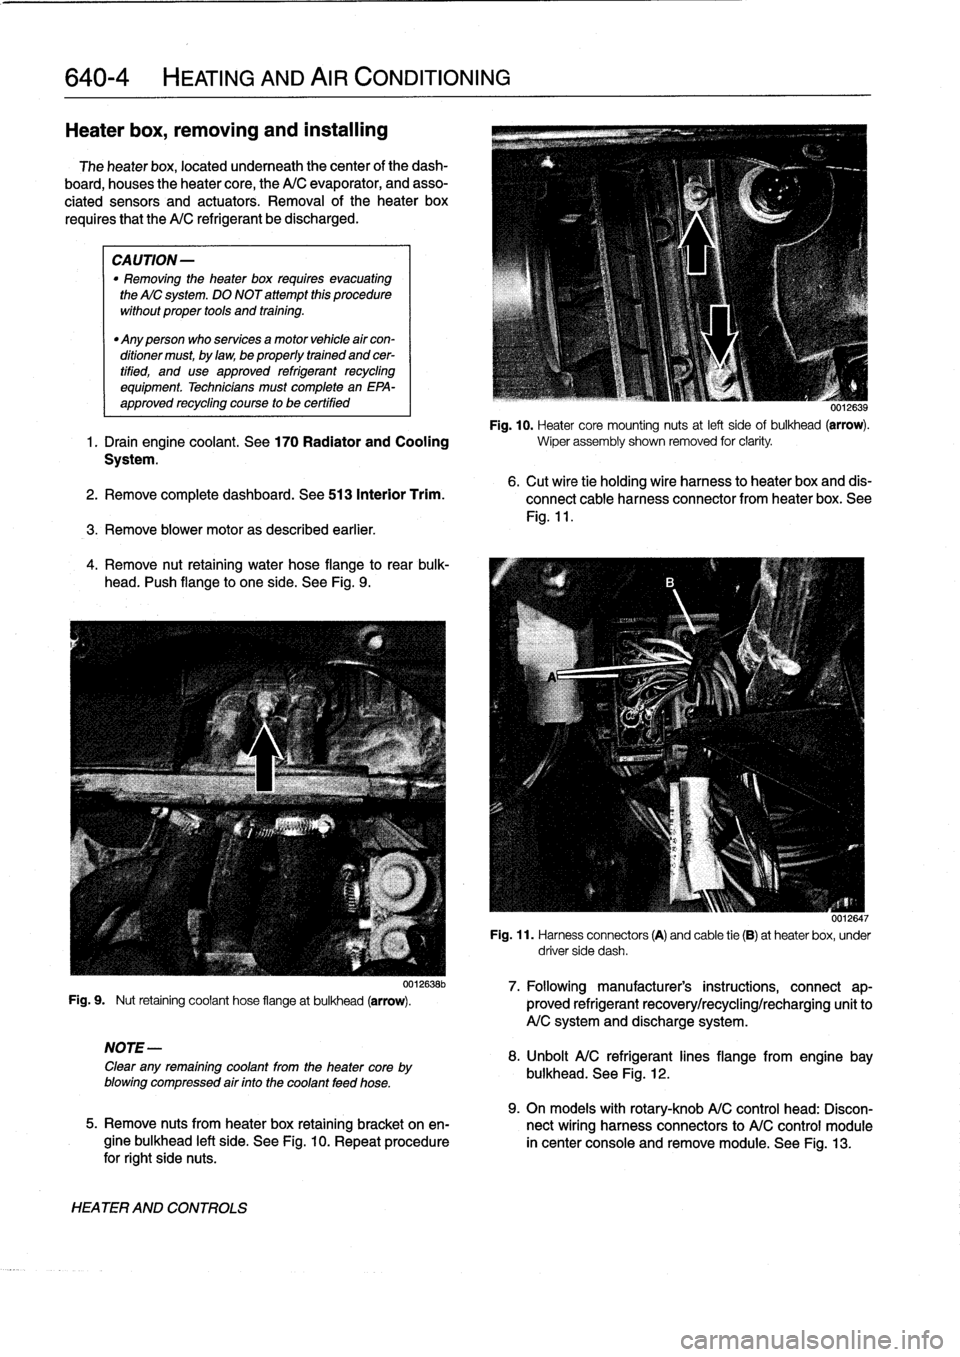 BMW 328i 1998 E36 User Guide 
640-4

	

HEATING
AND
AIR
CONDITIONING

Heater
box,
removing
and
installing

The
heater
box,
located
underneath
thecenter
of
the
dash-

board,
houses
theheater
core,
the
A/C
evaporator,
and
asso-

ci